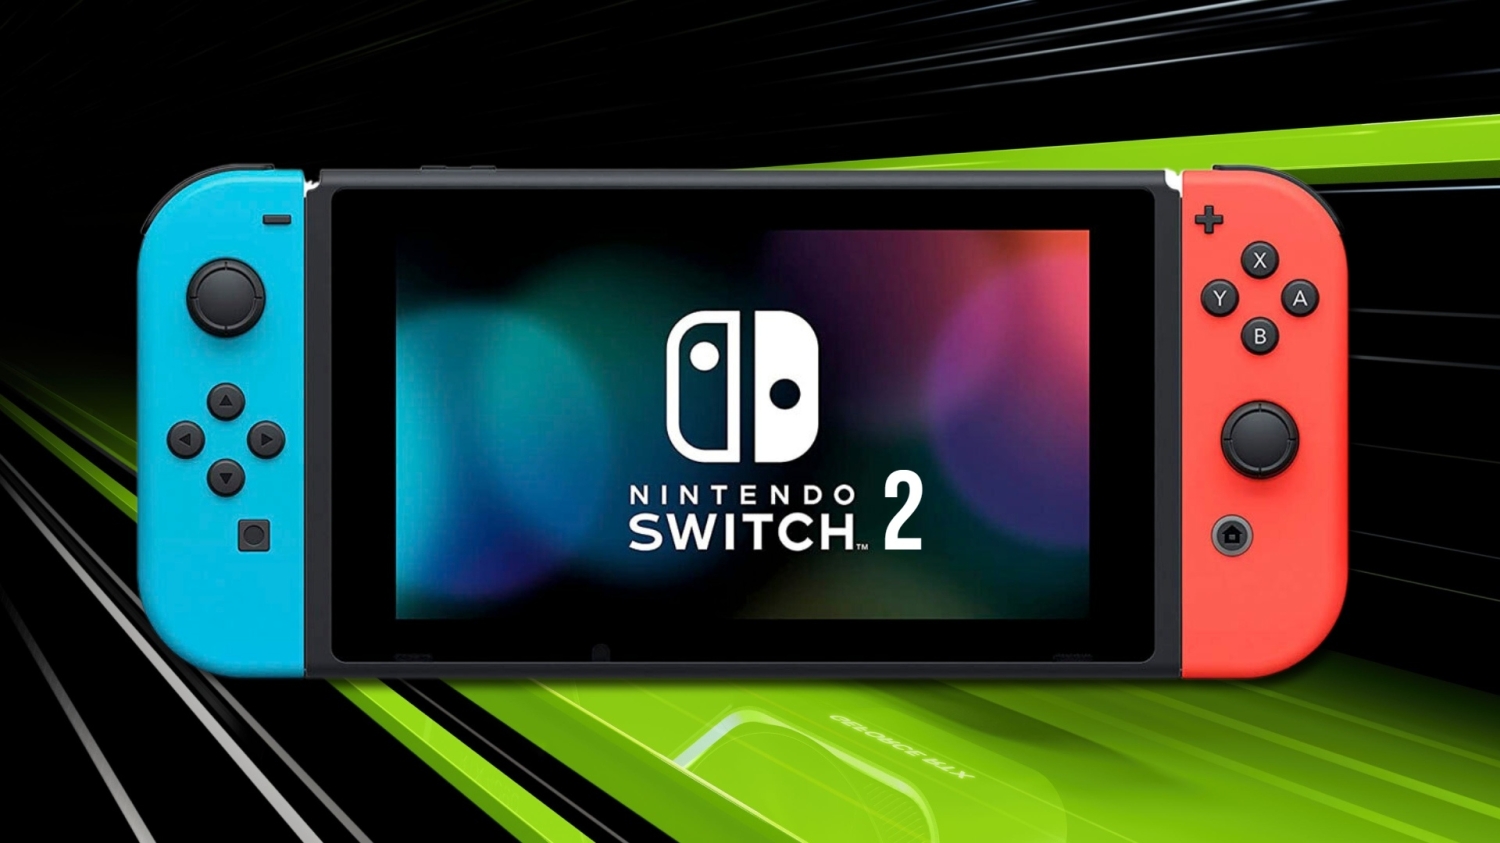 Nintendo Switch 2 SOC Rumored To Pack NVIDIA Ampere GPU With 1280